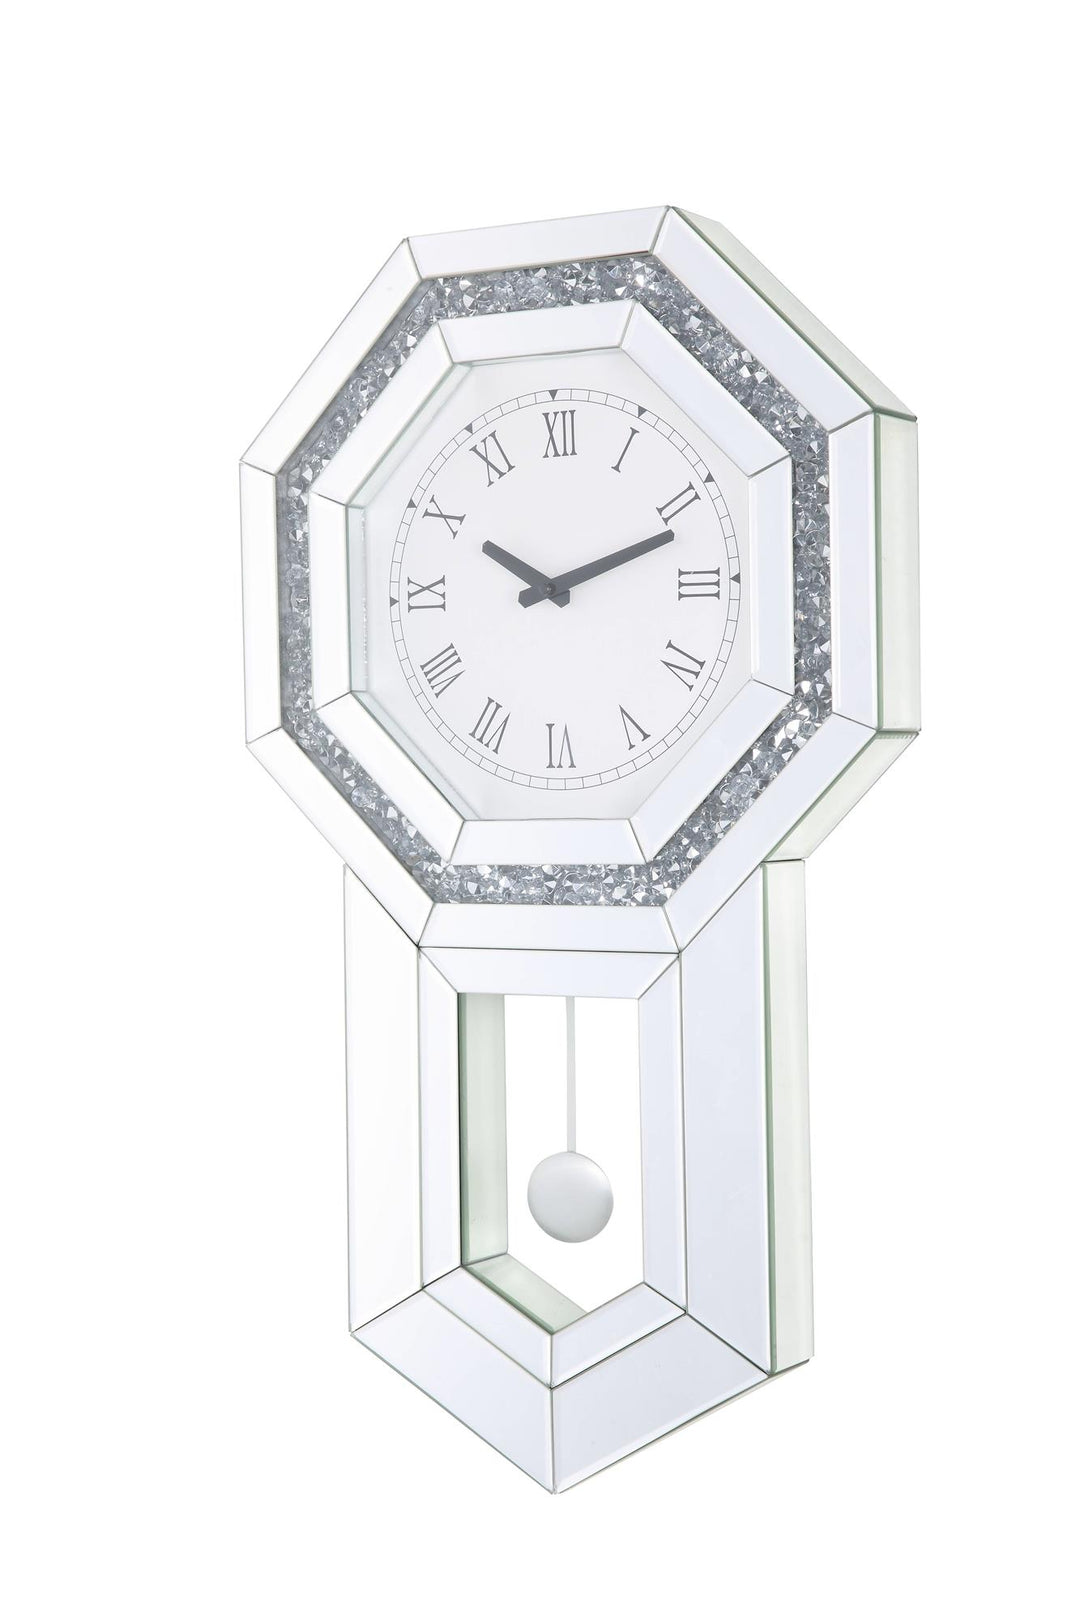 Octagonal Wall Clock with Faux Crystal Inlay - Chrome